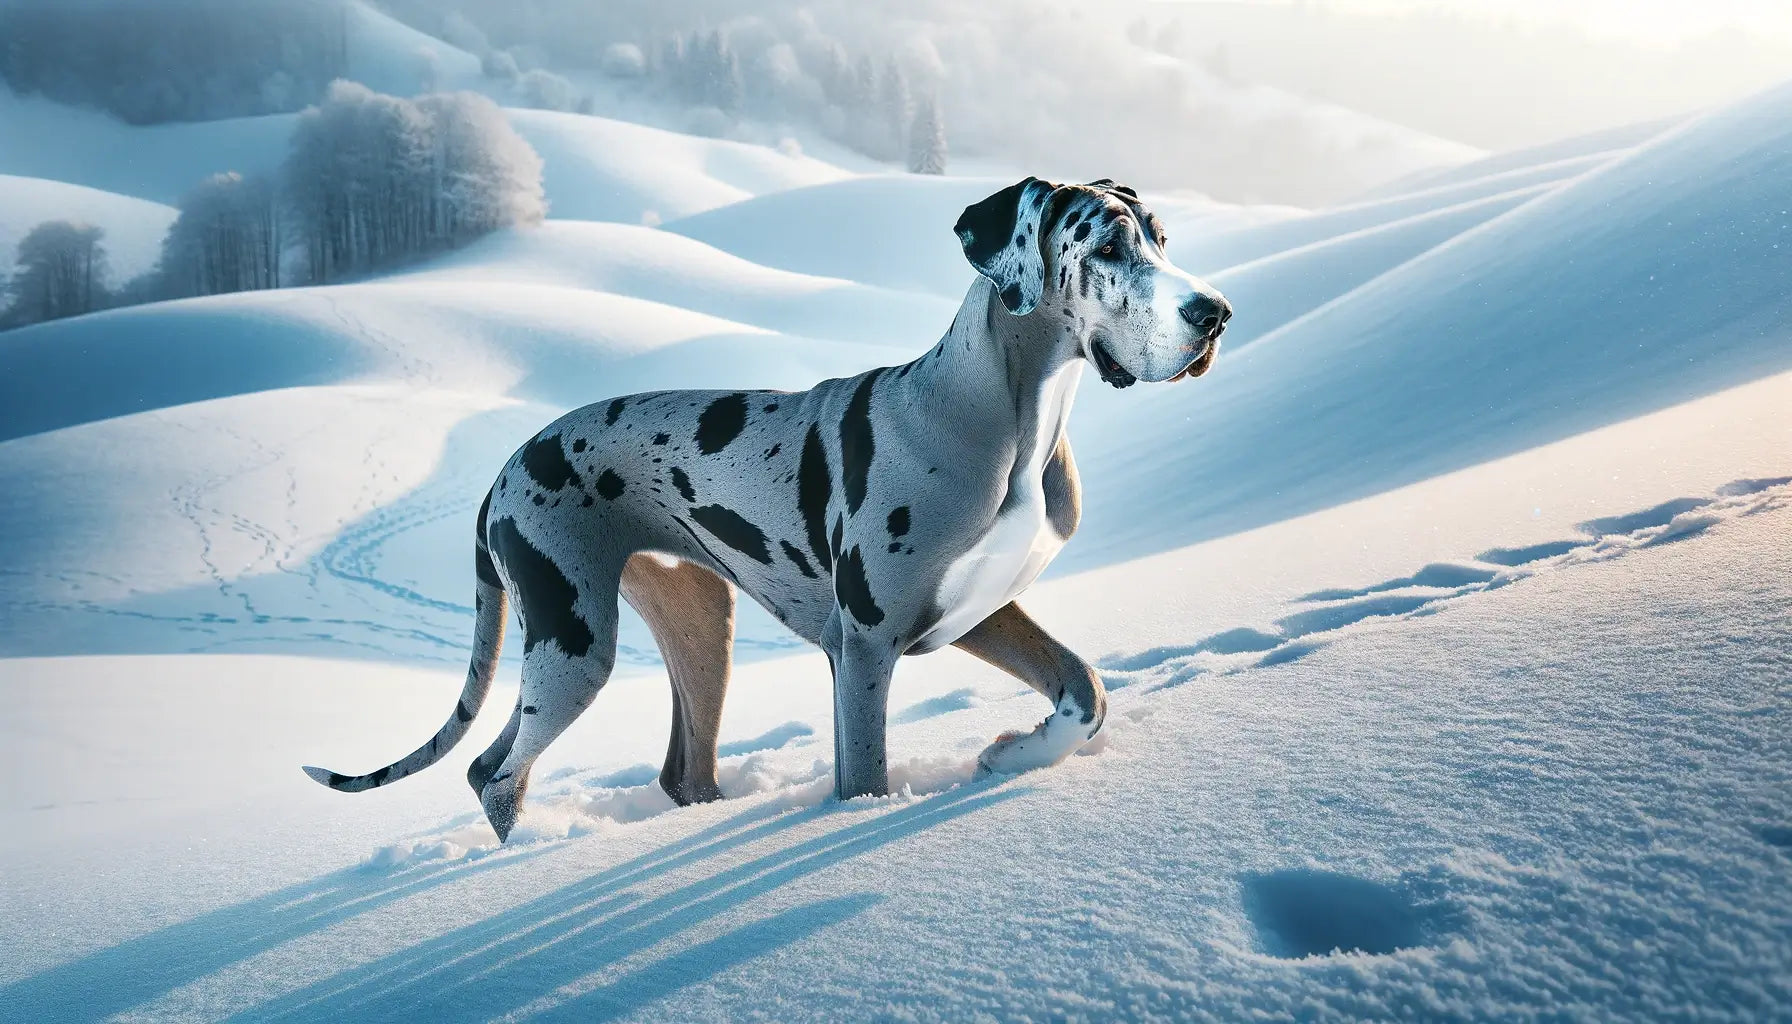 A Merle Great Dane on a snowy hill, with its distinctive merle coat contrasting beautifully against the white snow.